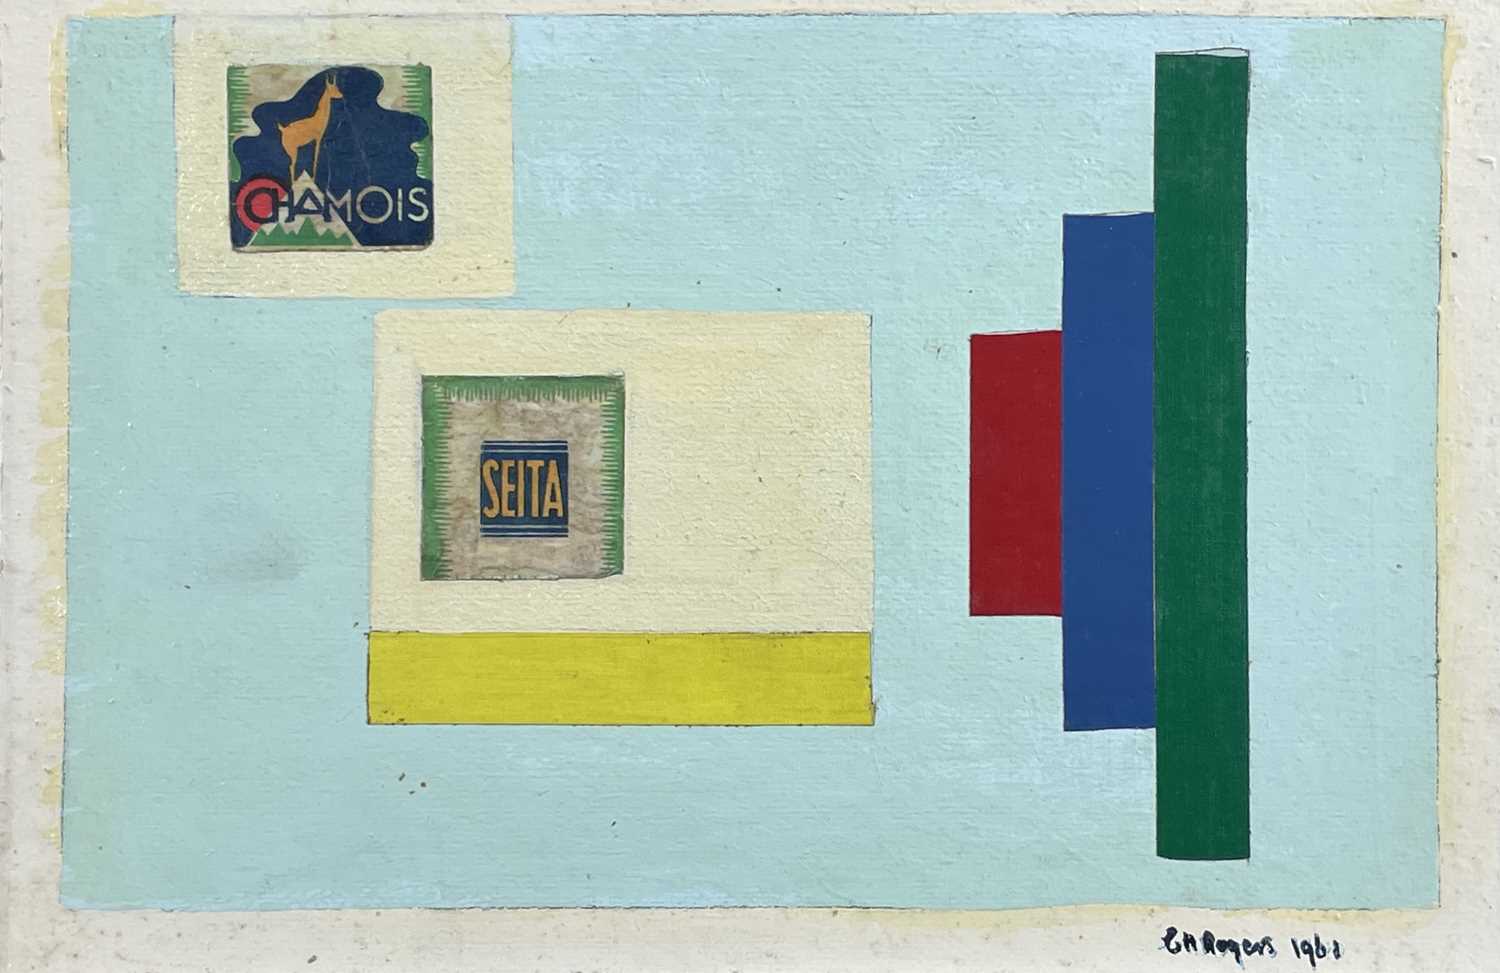 Edward H. ROGERS (1911-1994) Abstract - Seita Mixed media collage Signed and dated Signed, inscribed